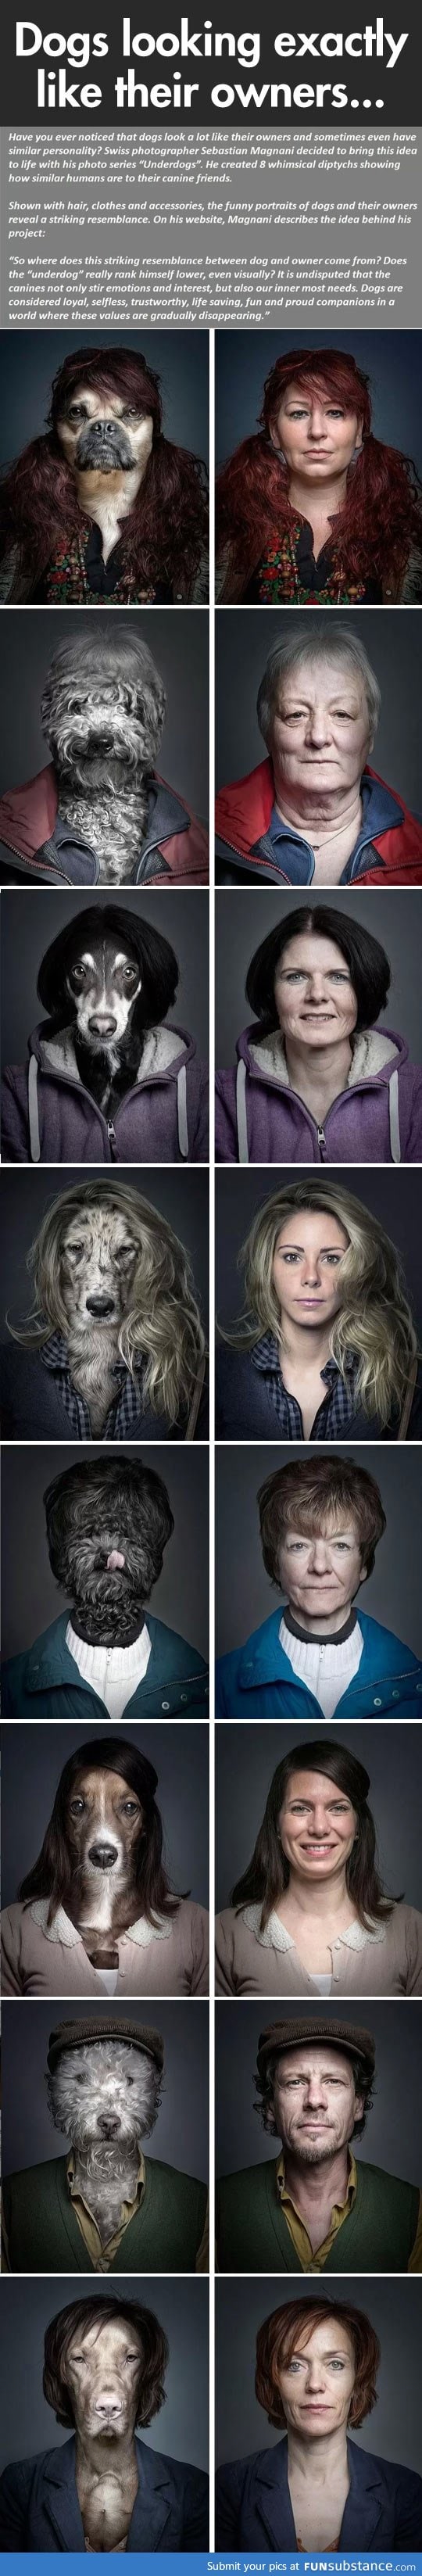 Dogs looking like their owners